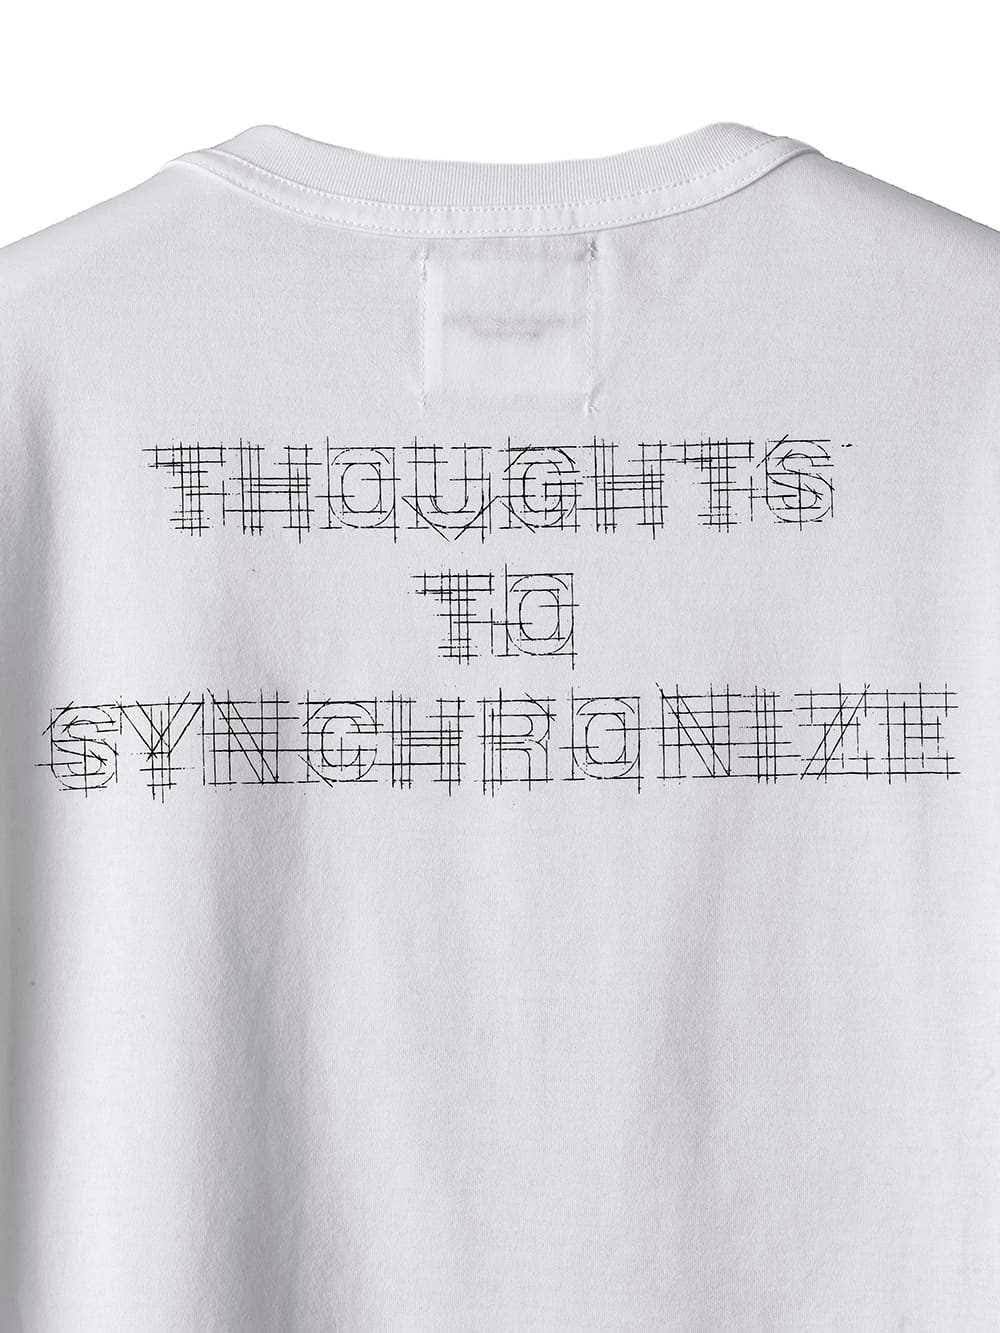 Thoughts to synchronize. (s/s pocket tee)